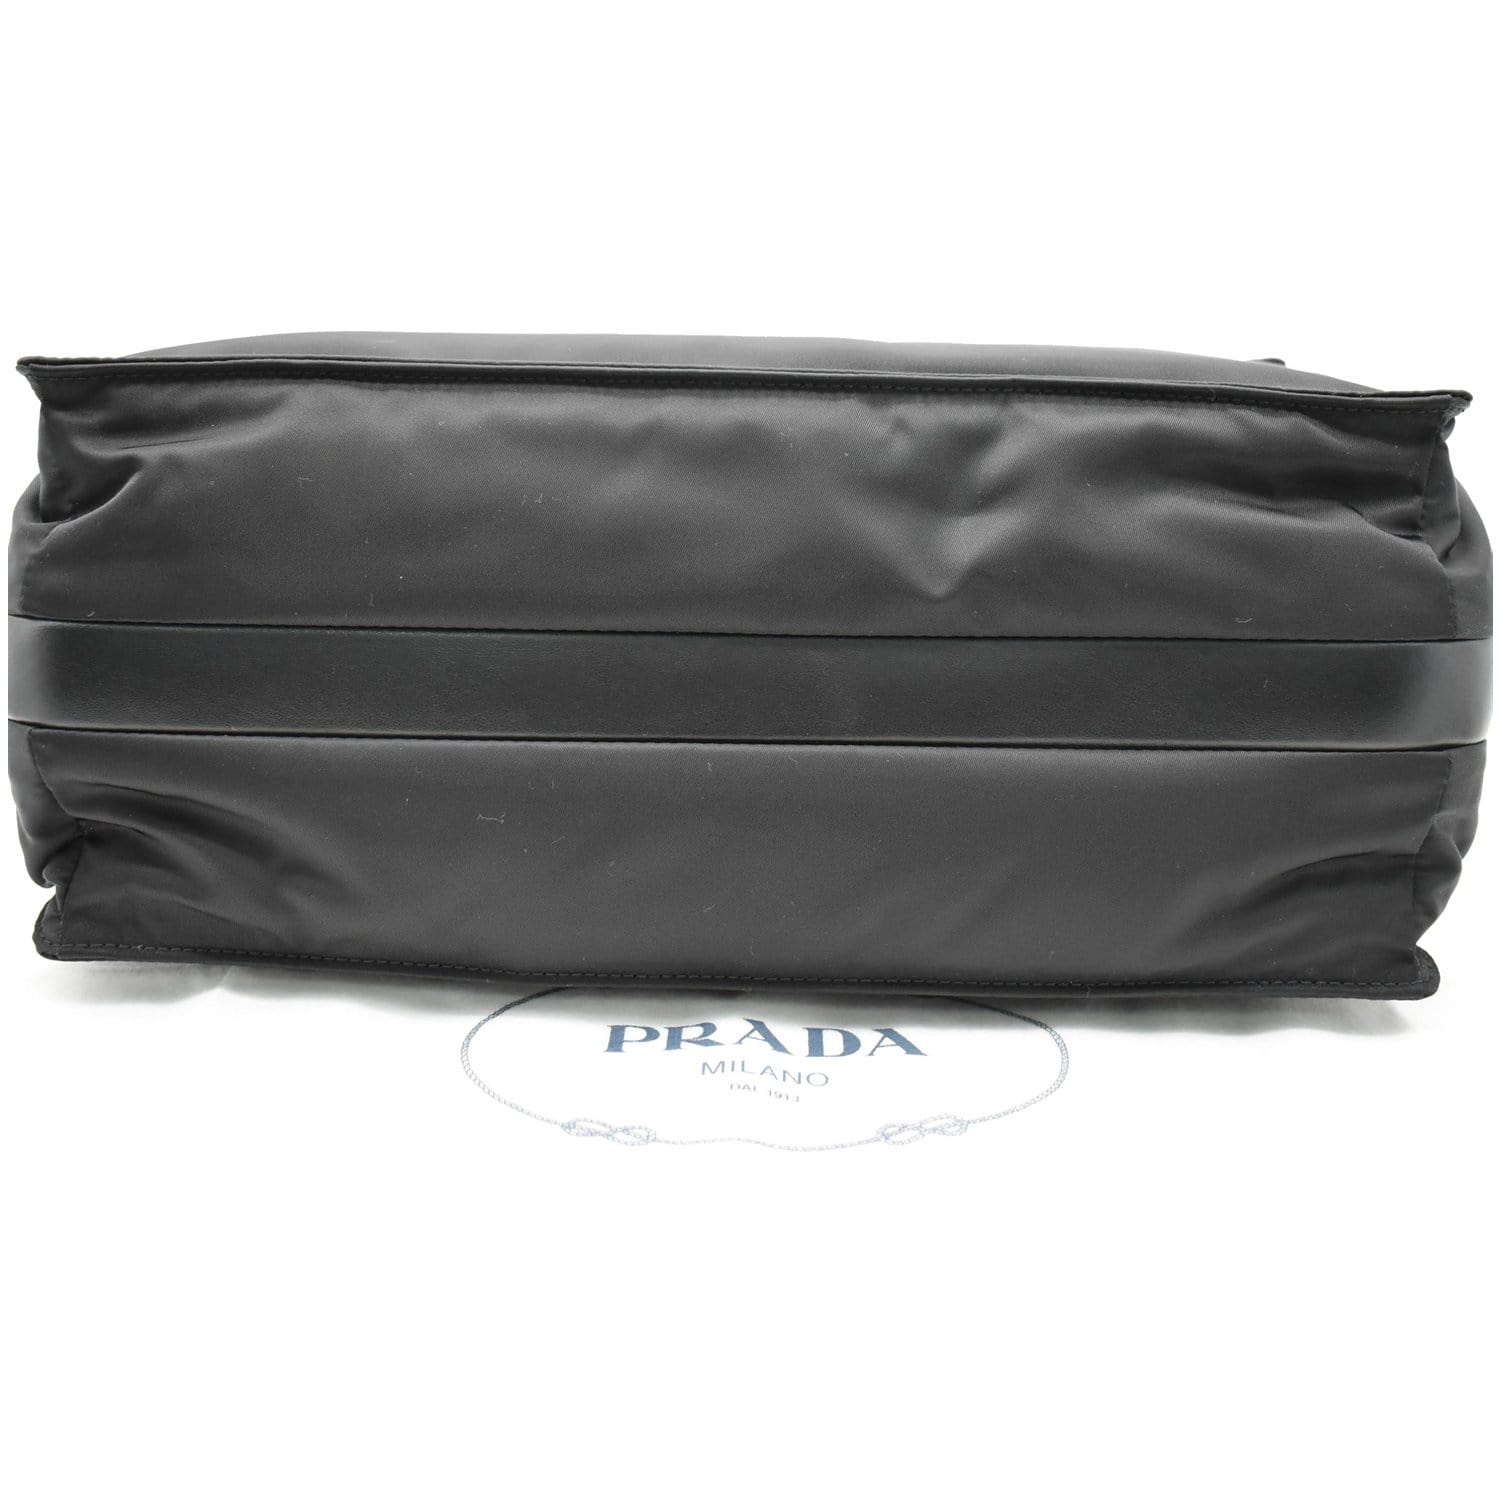 Prada Padded Re-Nylon Shoulder Bag Black in Fabric with Silver